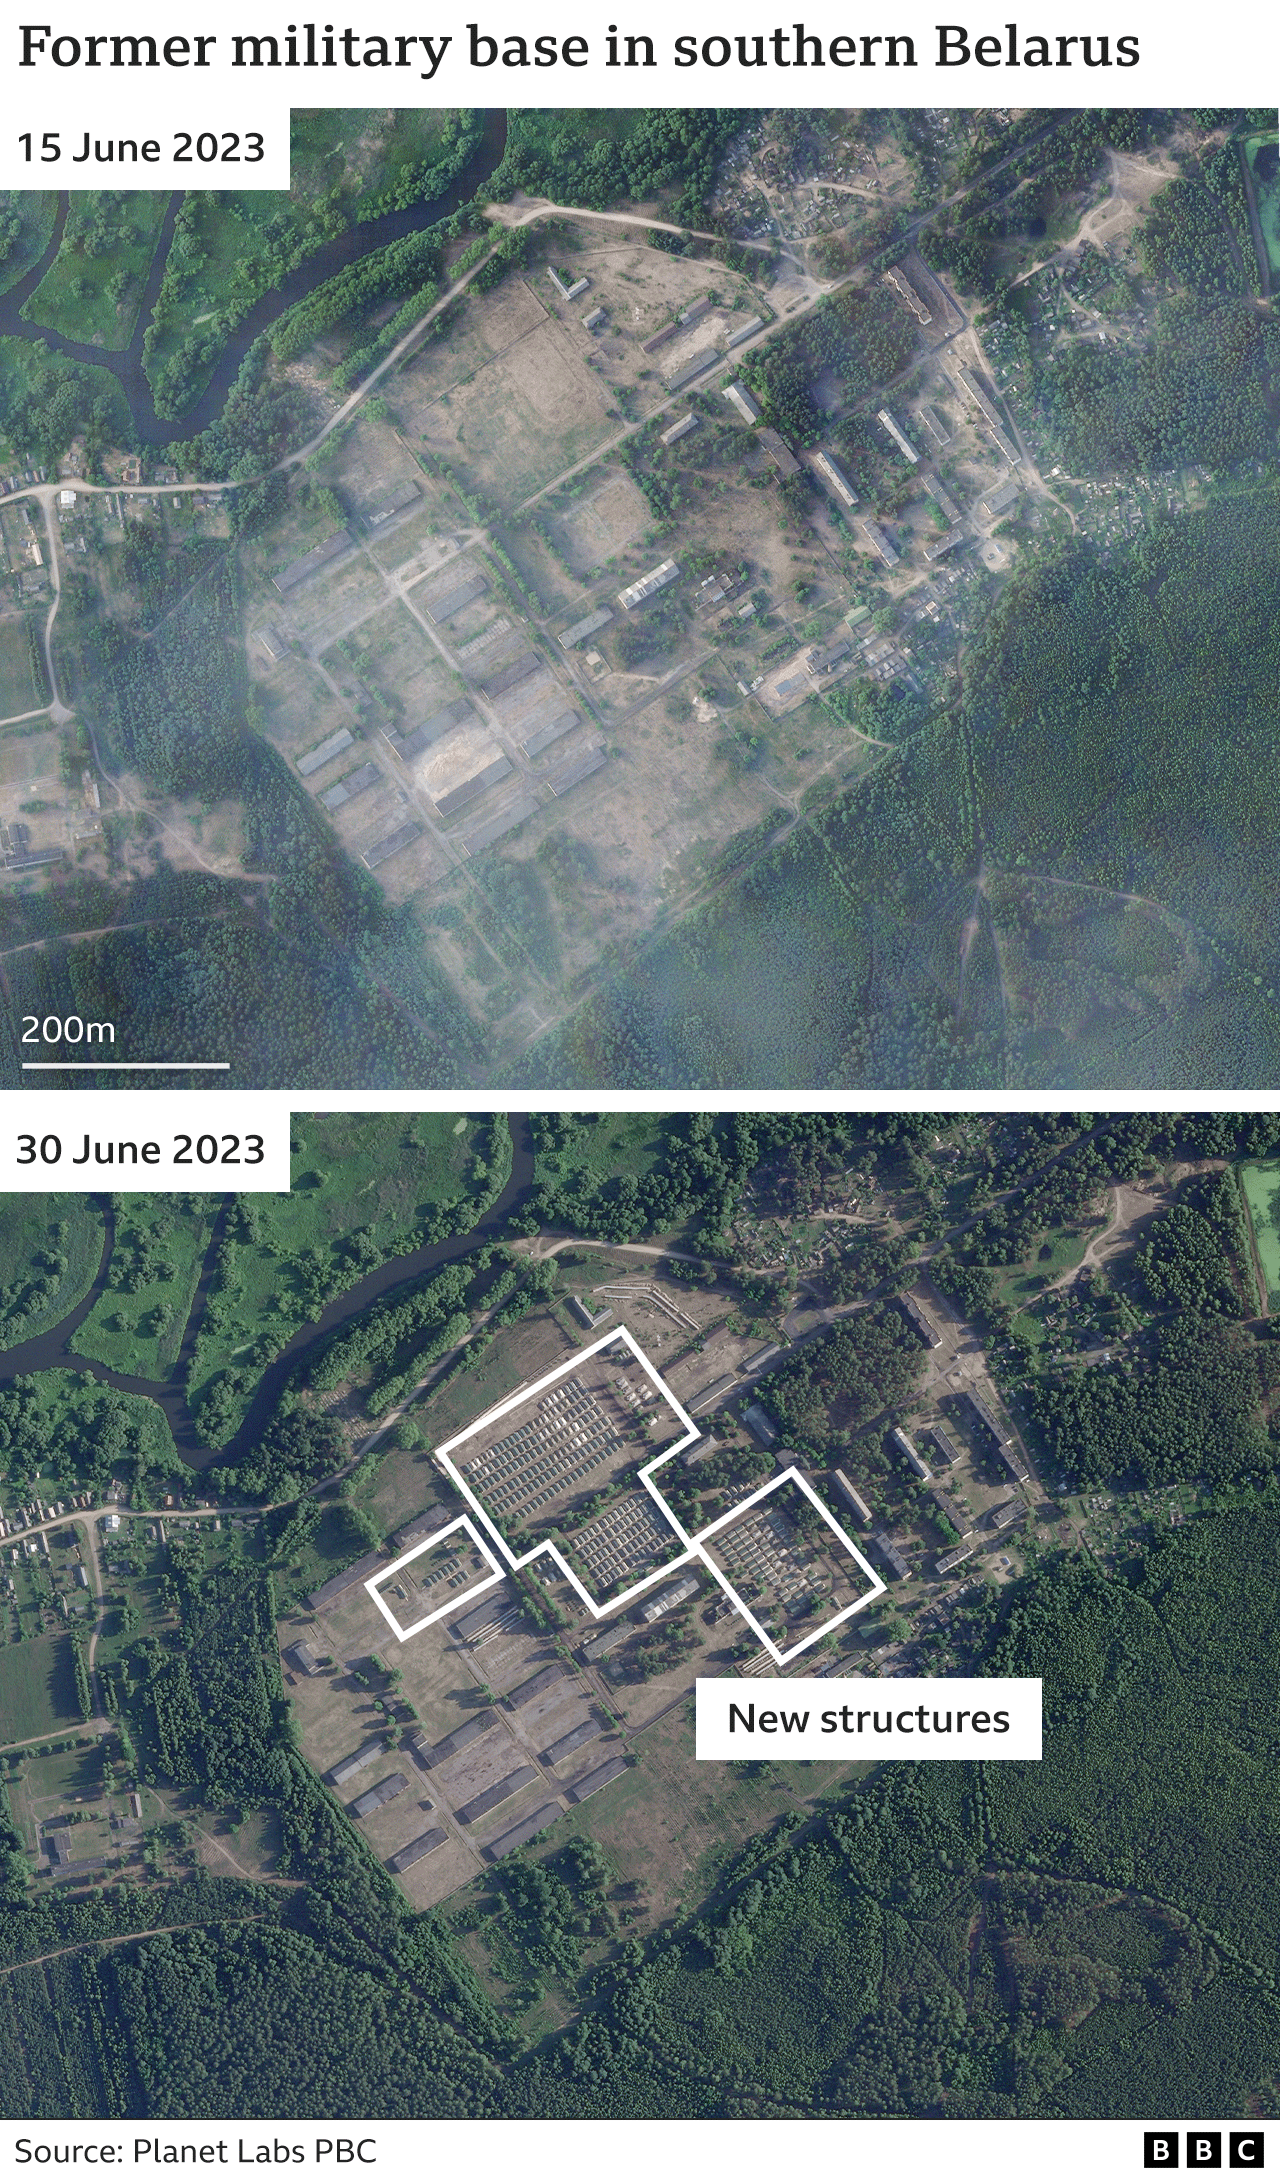 New structures in Military site in Belarus